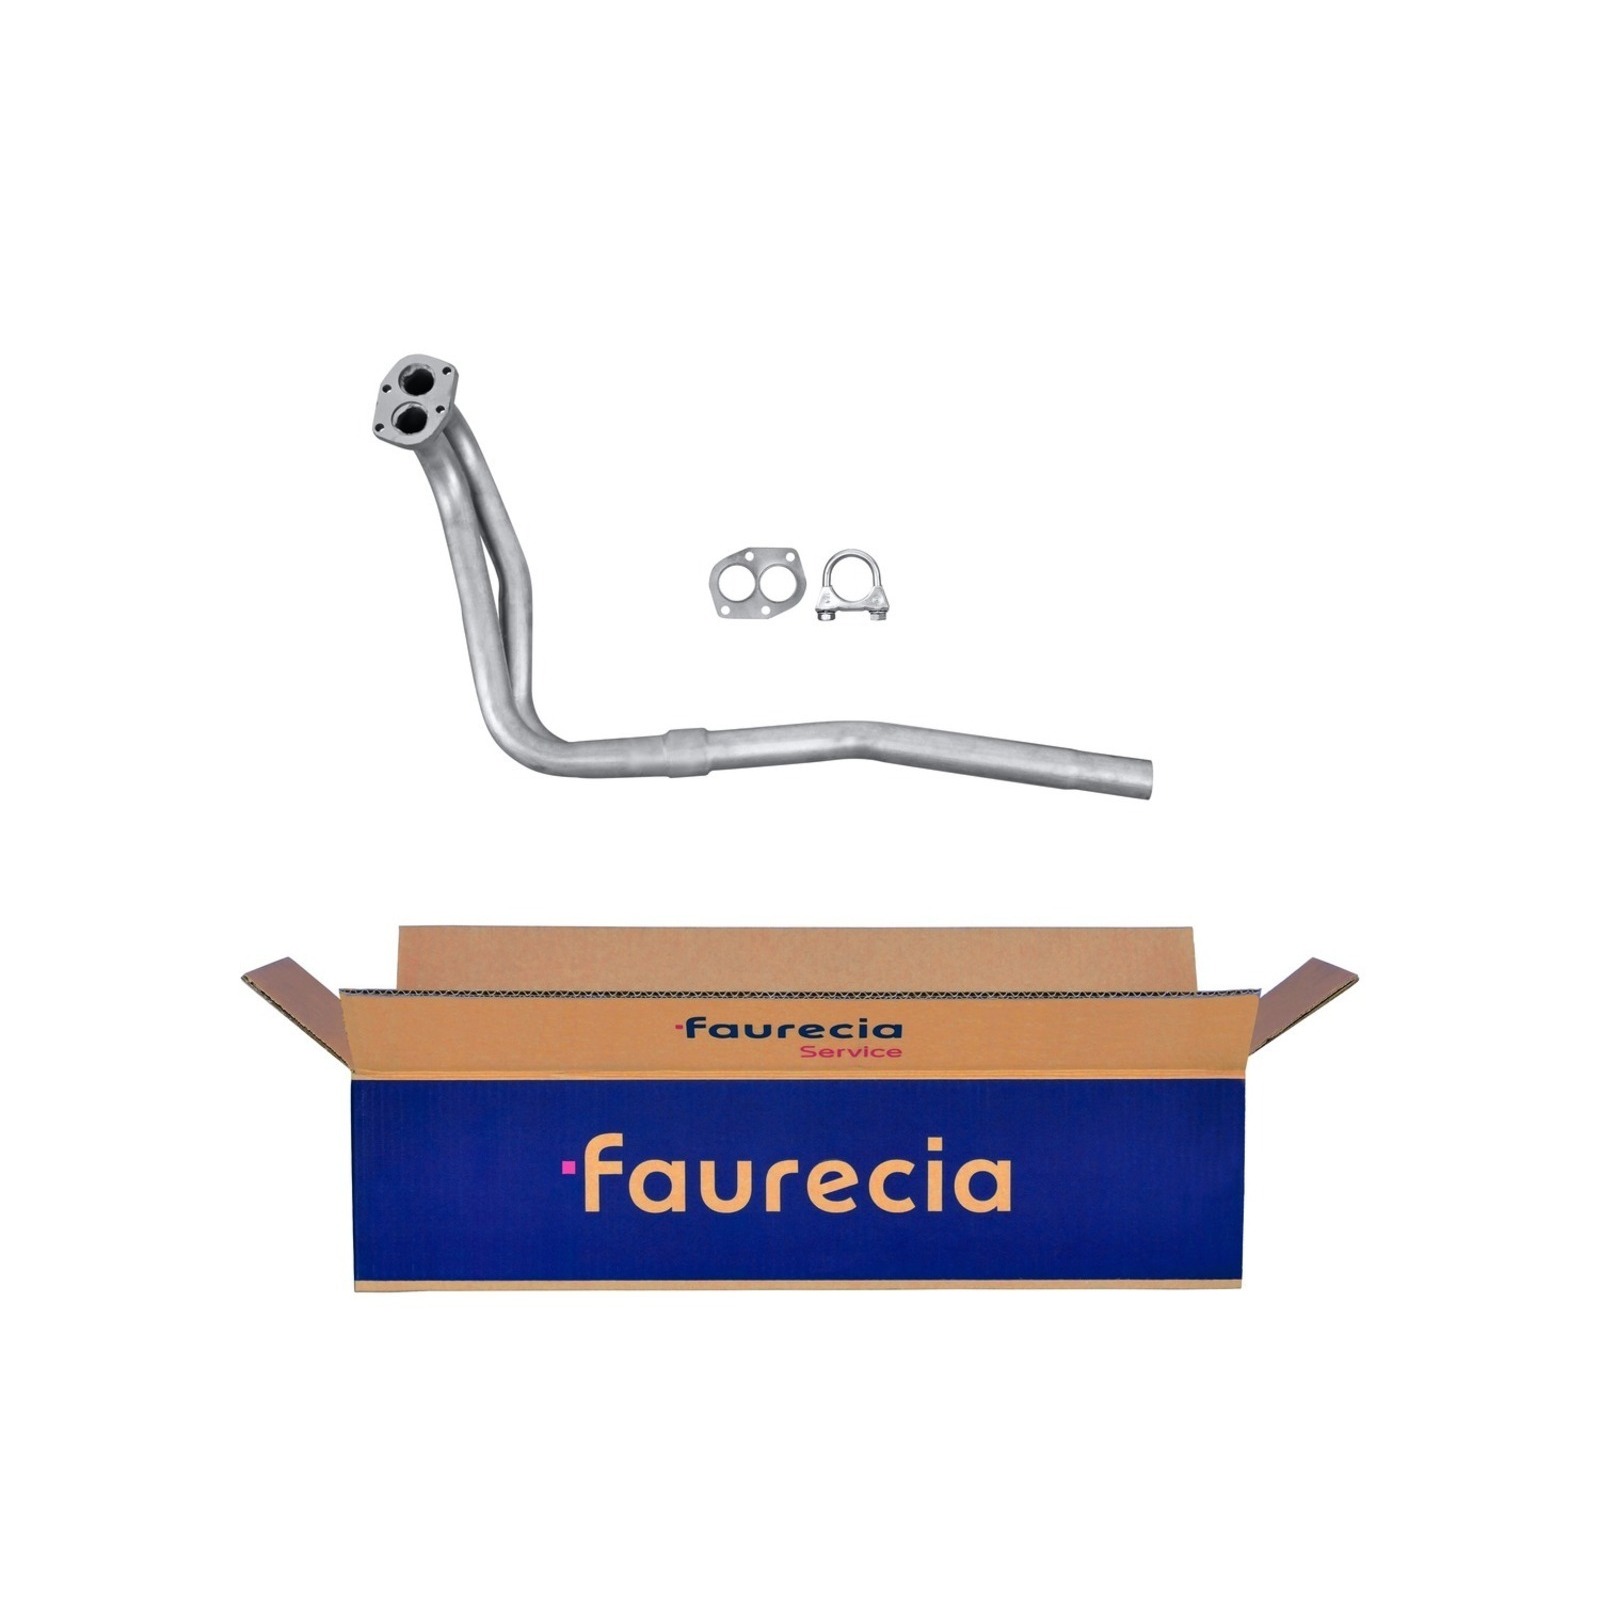 HELLA Exhaust Pipe Easy2Fit – PARTNERED with Faurecia